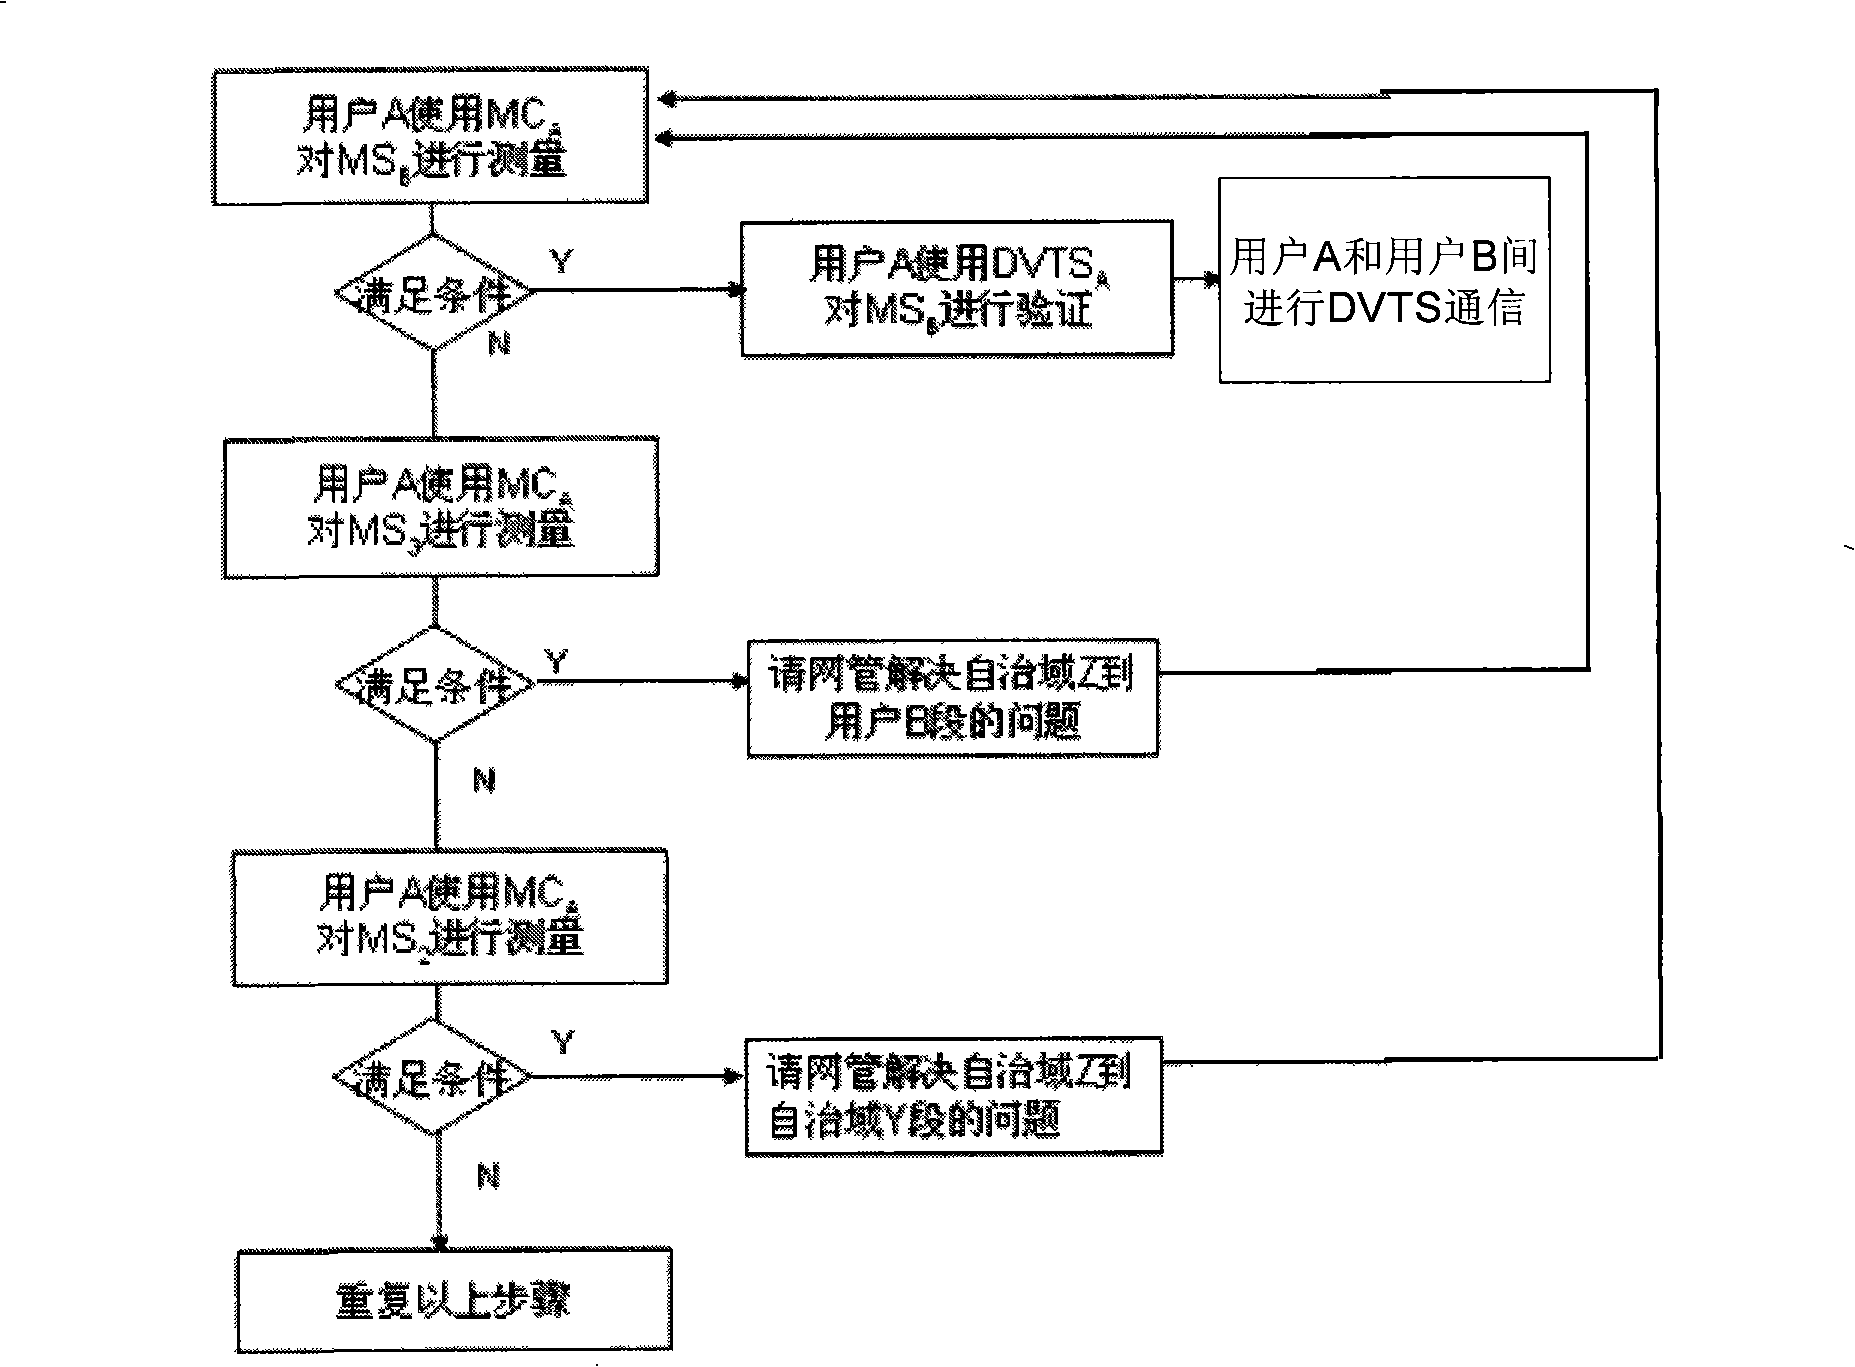 Method for measuring network application performance supporting internet high bandwidth real time video application